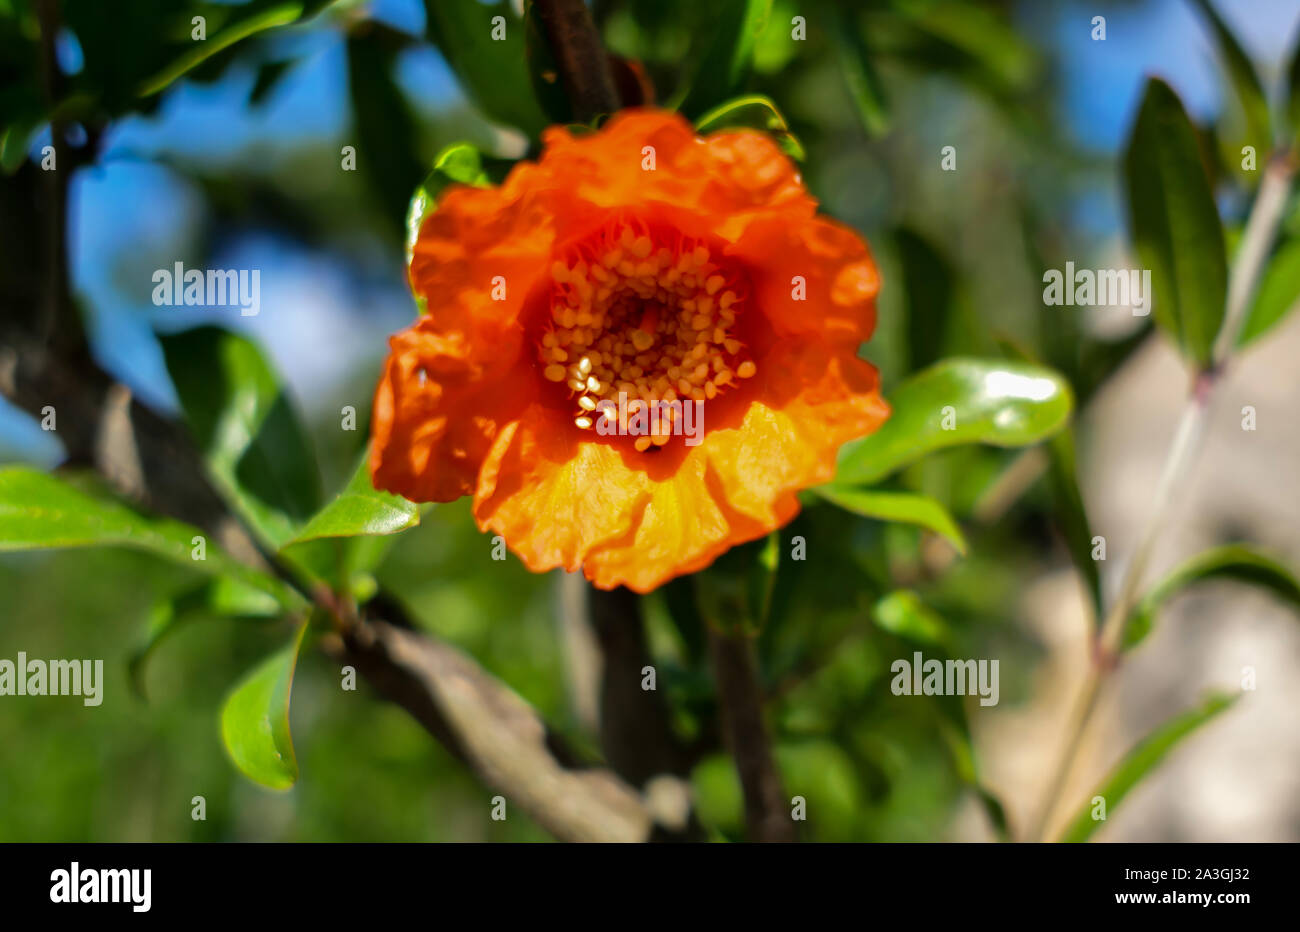 Bright orange pomegranate flower in green leaves, close-up Stock Photo